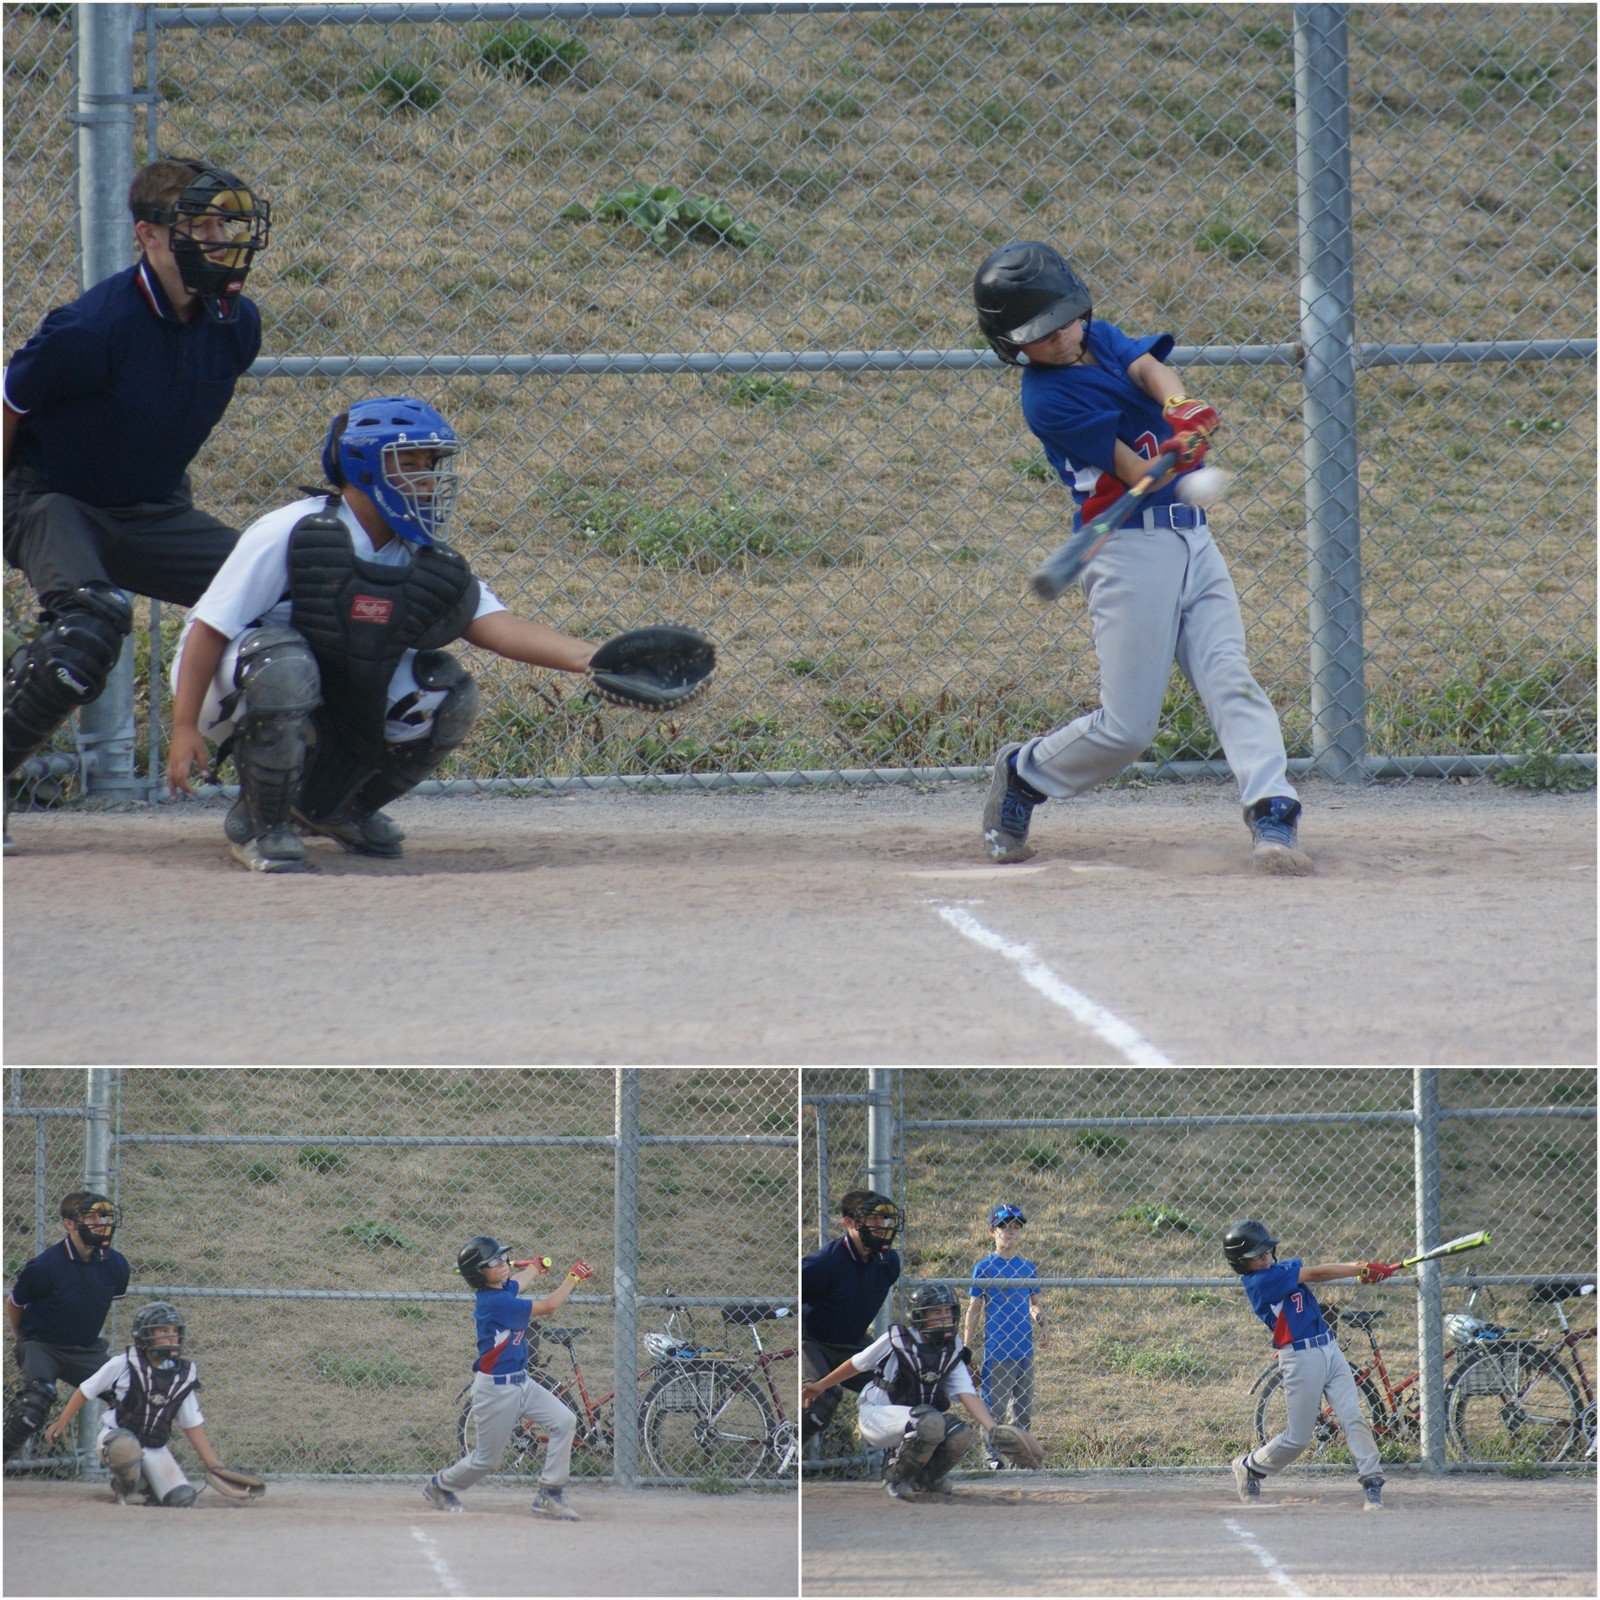 In three at bats, Charlie (7) delivered a lead off double in the first inning [top]; a 2 RBI triple in the second frame [bottom right]; and a bases loaded 3 RBI triple in the third inning [bottom left]. Charlie went 3 for 3 versus the Martingrove White Sox to power the TP attack with two runs scored 5 RBI's.